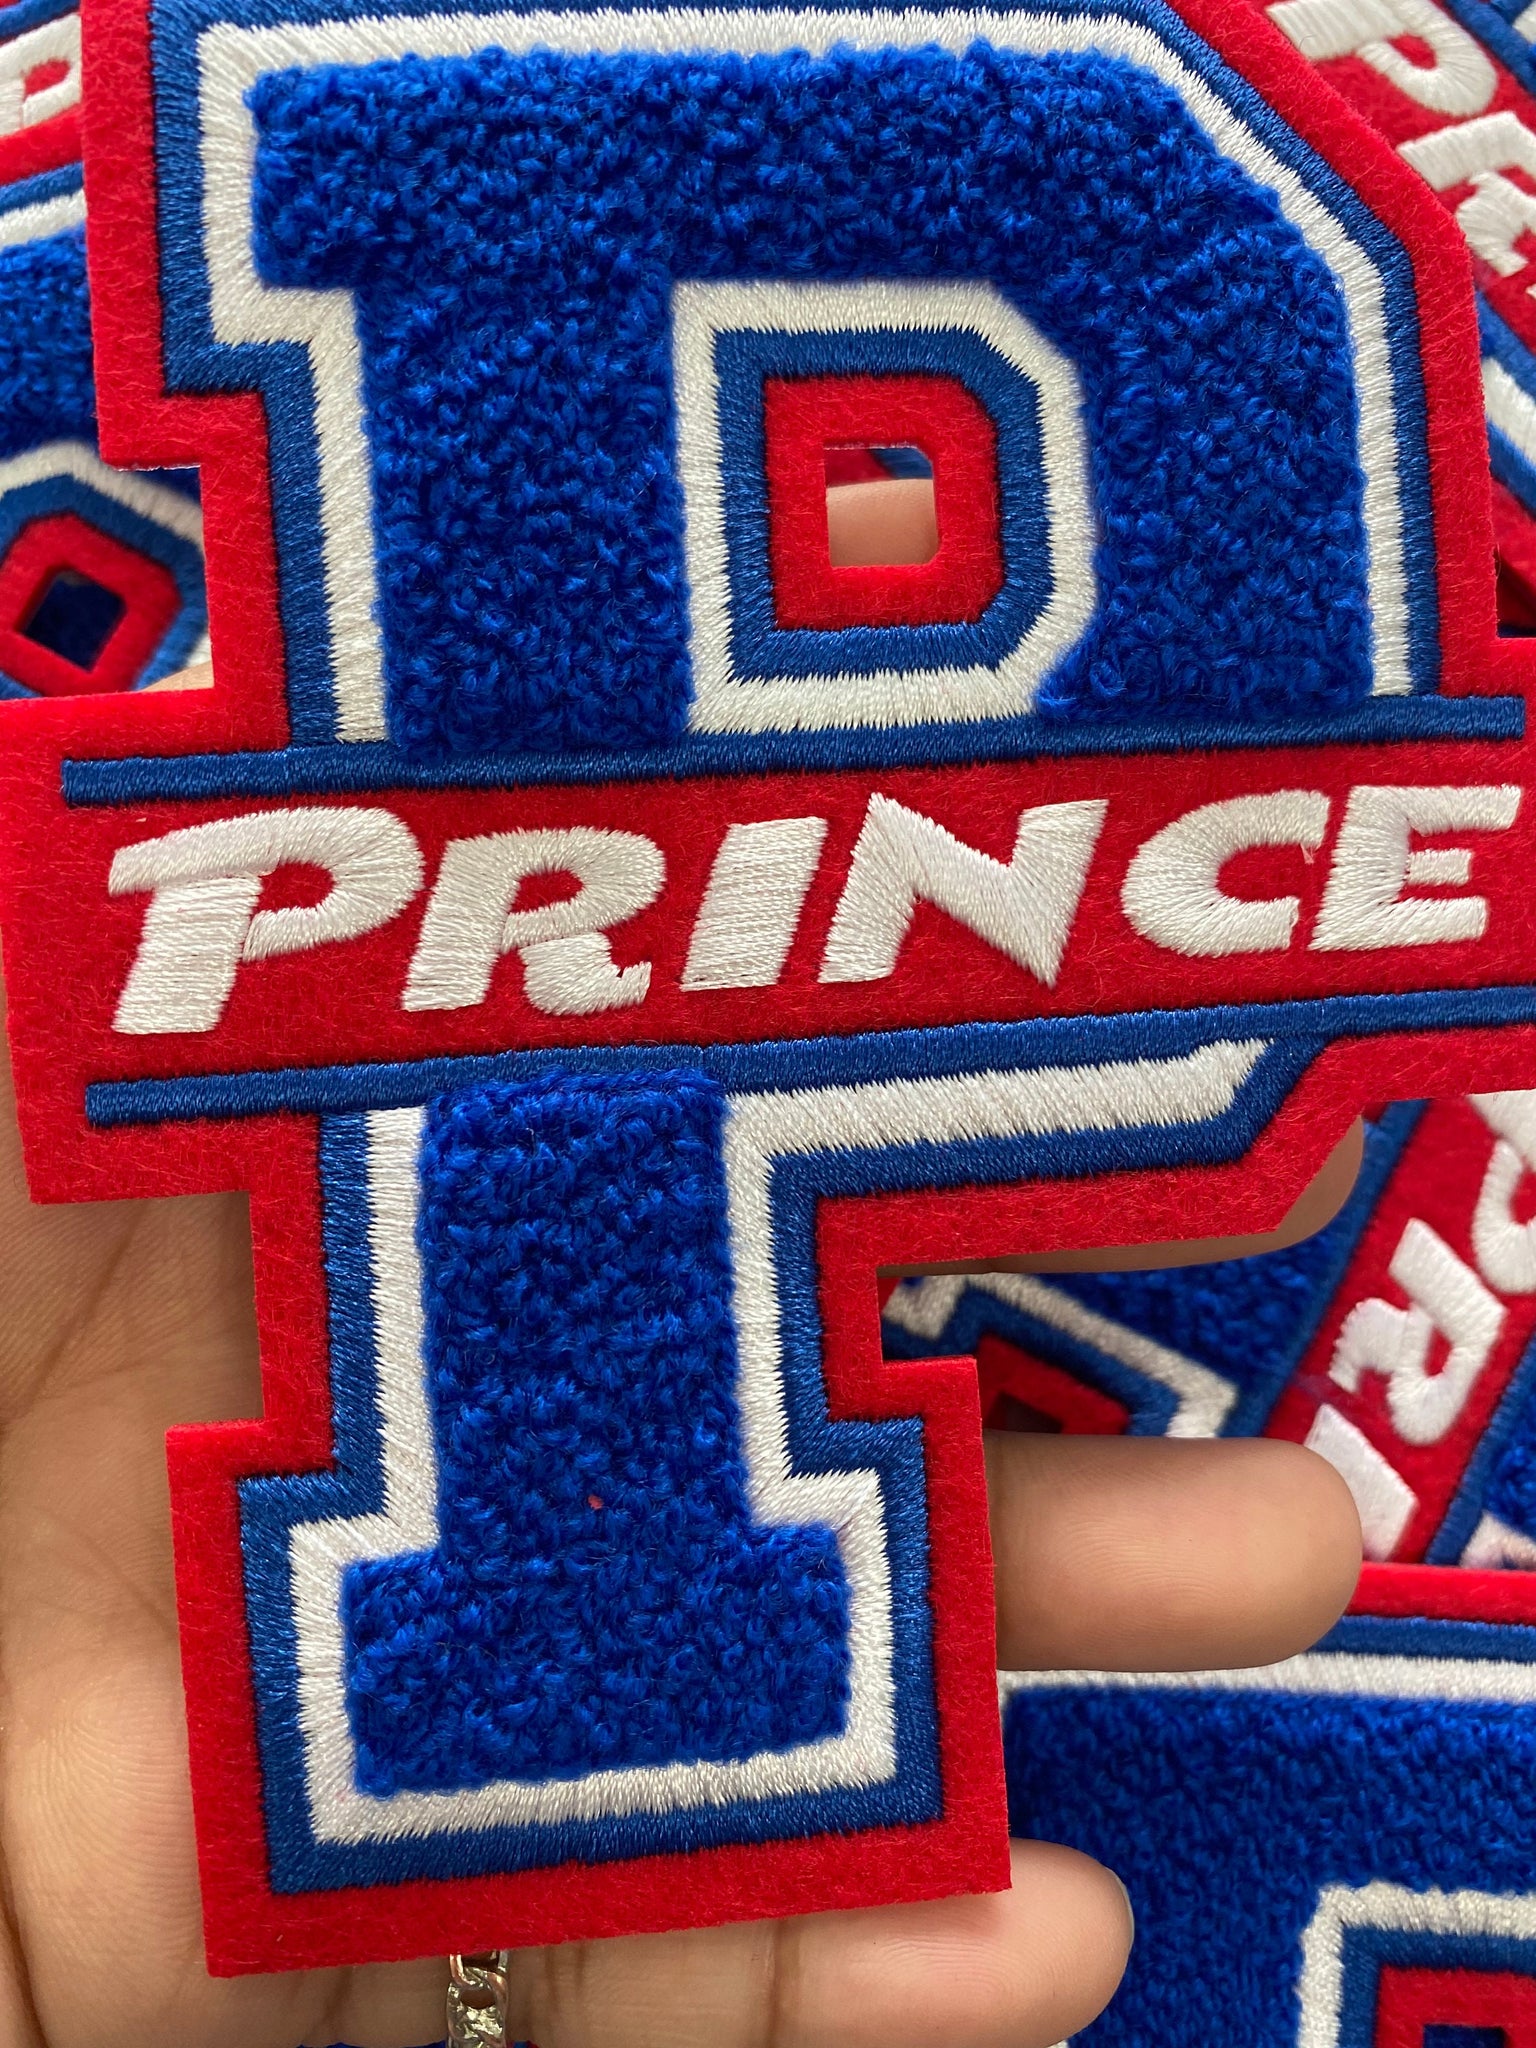 Black-History-Sale Monogram Letter, "P" Embroidered Word PRINCE, Blue, Red, White, Size 6", Iron-on Backing, Medium Applique, Varsity